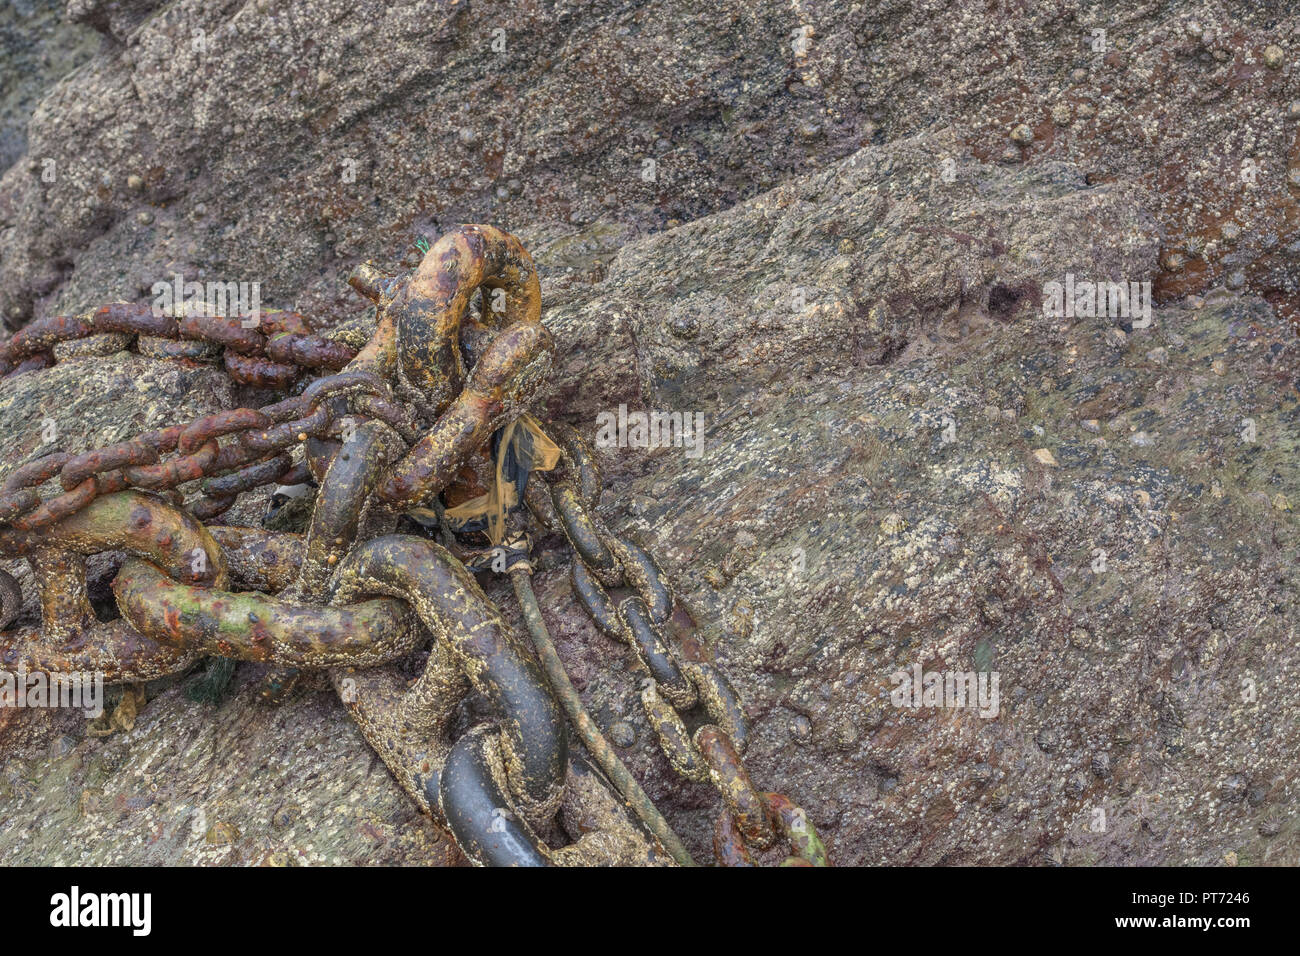 Old and rusty mooring chains. Metaphor strong links, strongest link, forge links, close ties. Stock Photo